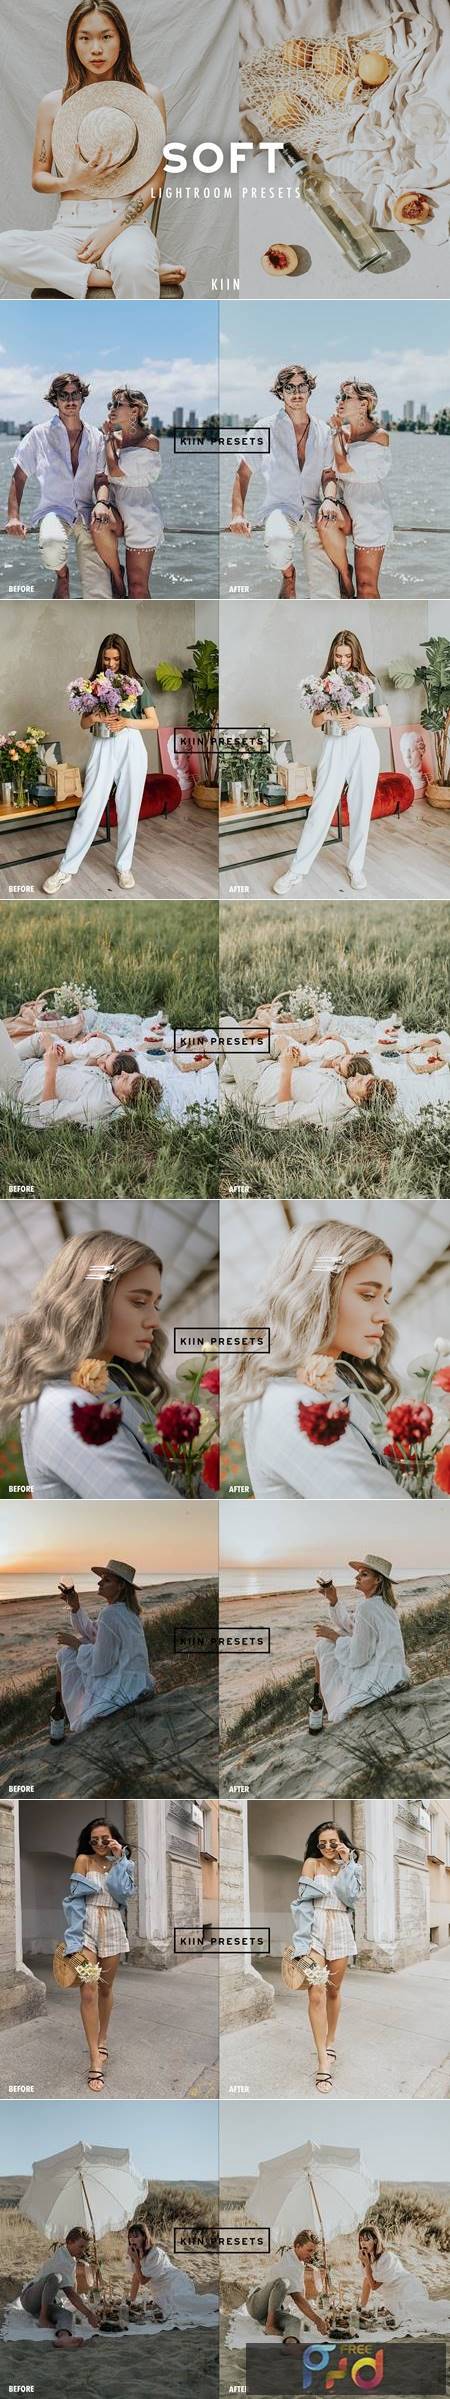 5 SOFT AND AIRY LIGHTROOM PRESETS 6115156 1